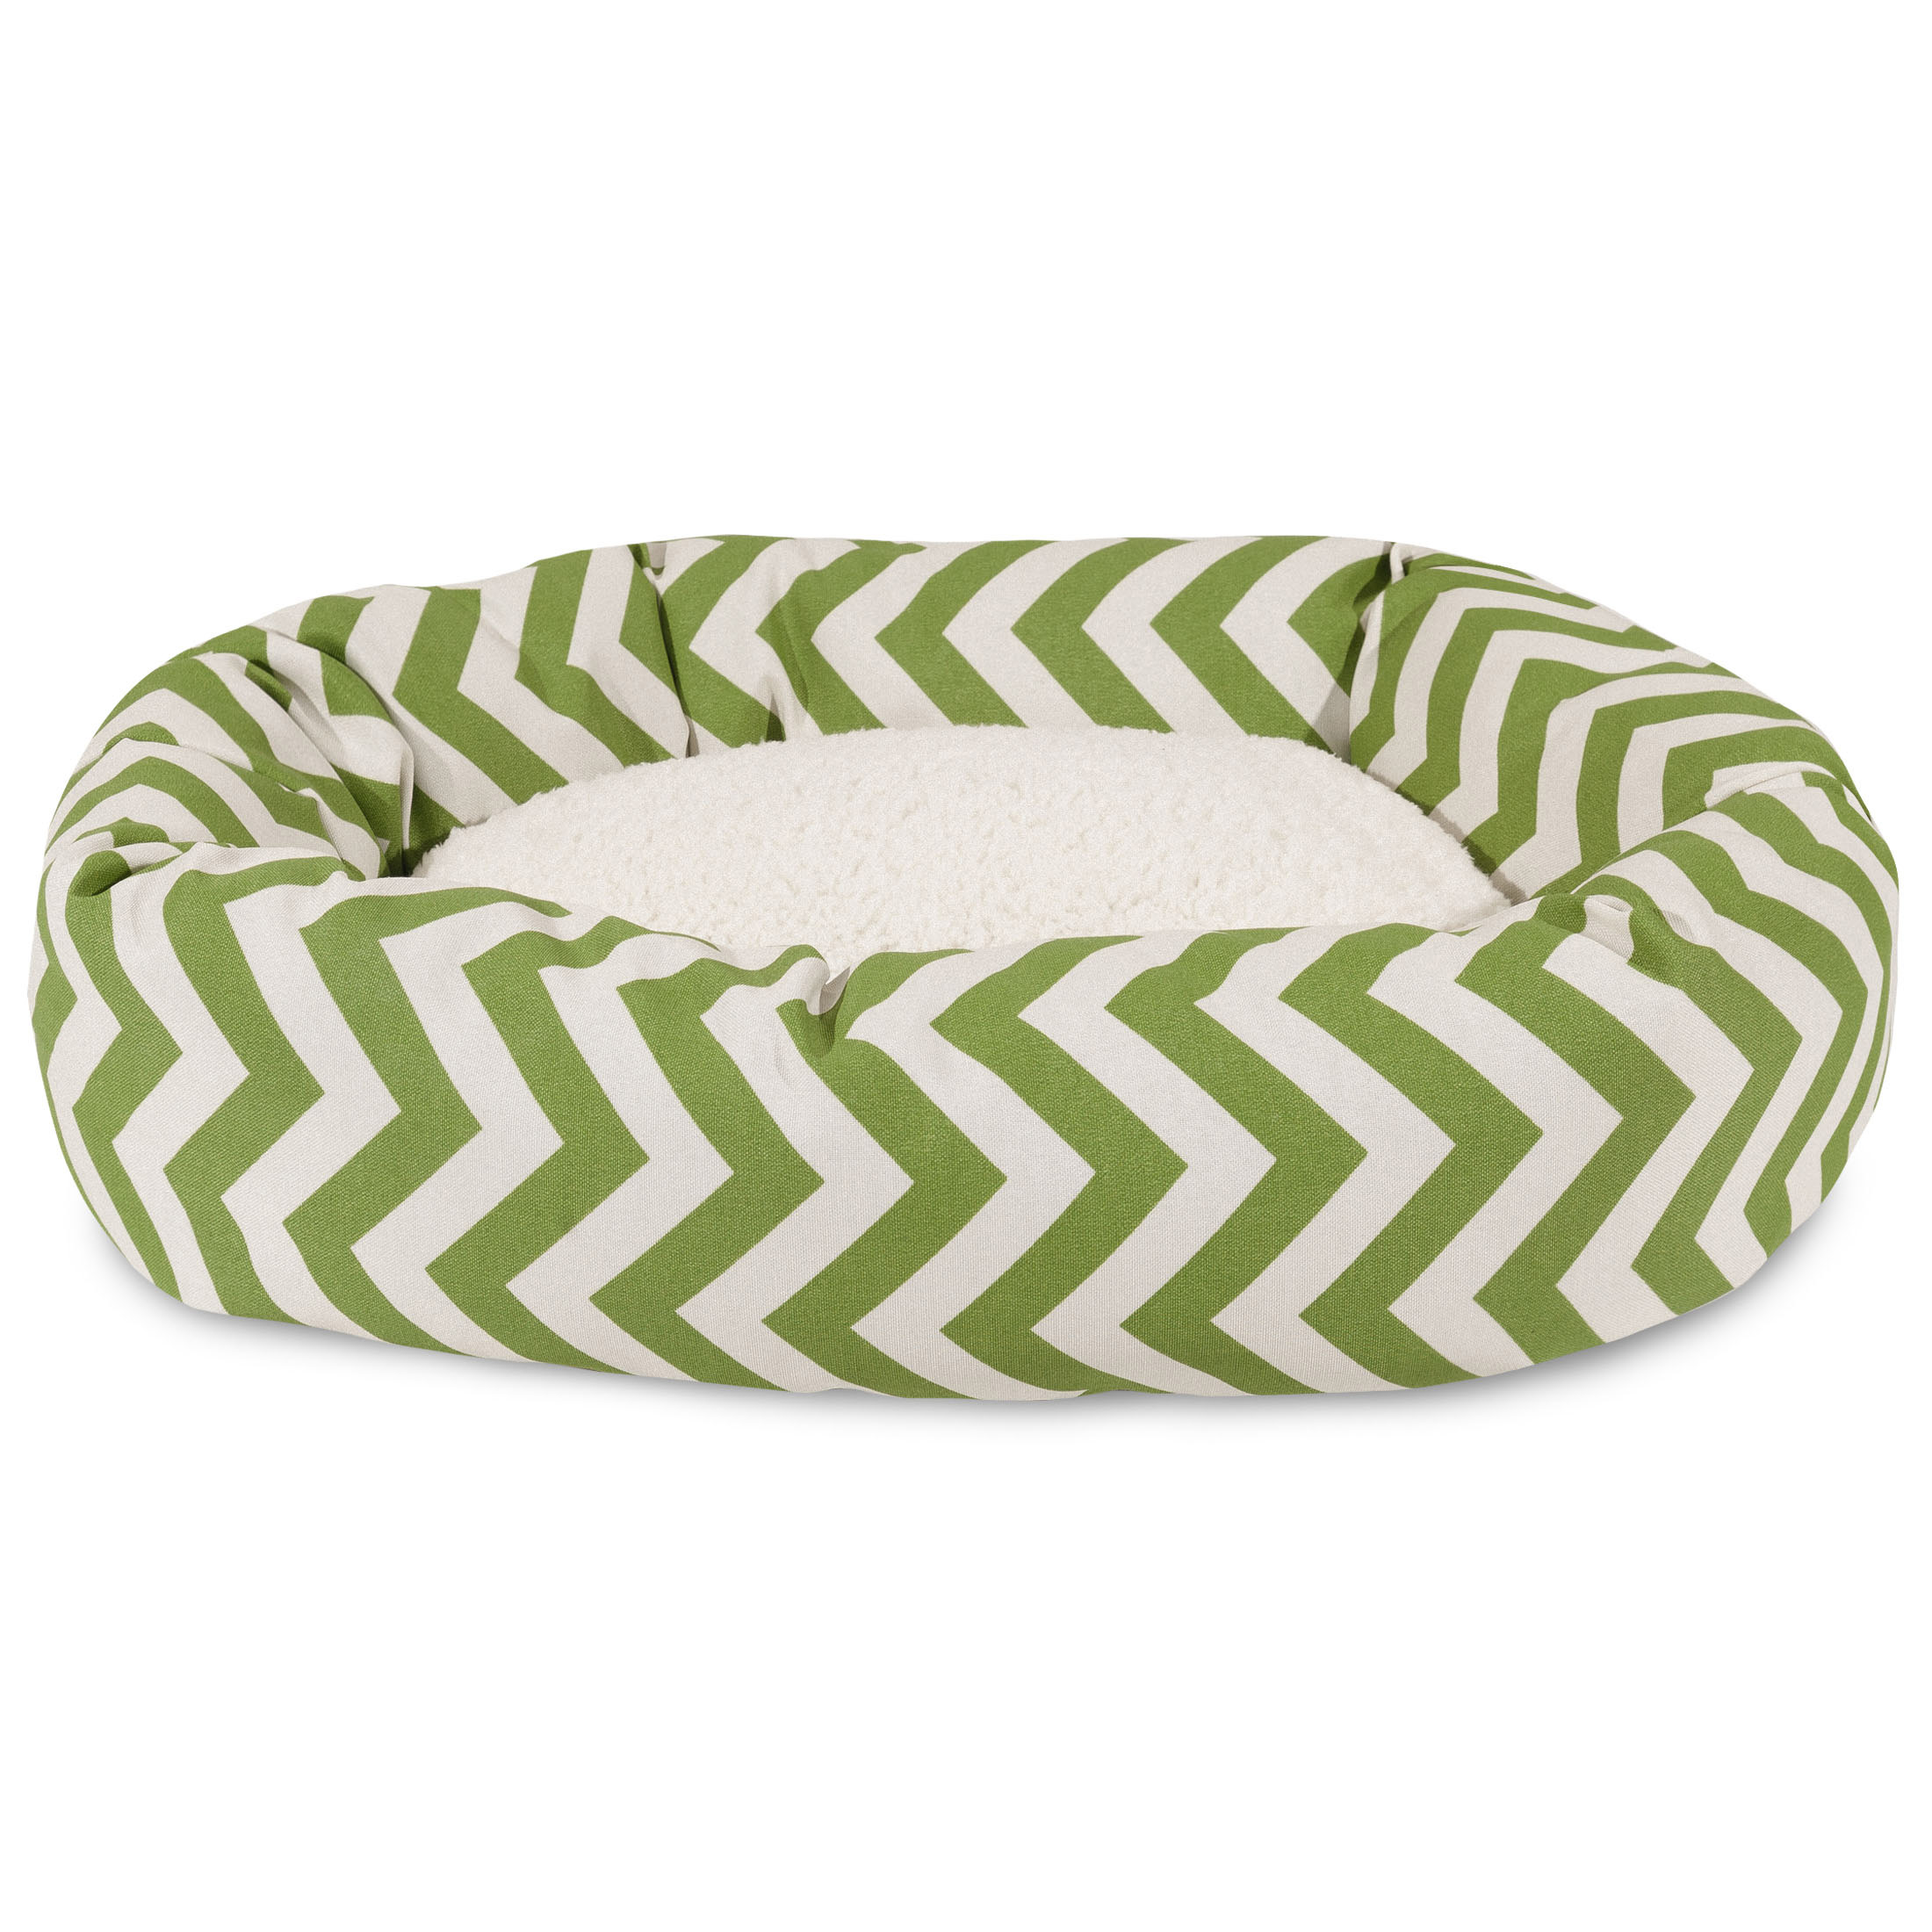 Majestic Pet Sherpa Chevron Bagel Pet Bed for Dogs, Calming Dog Bed Washable, Small, Sage - image 2 of 5